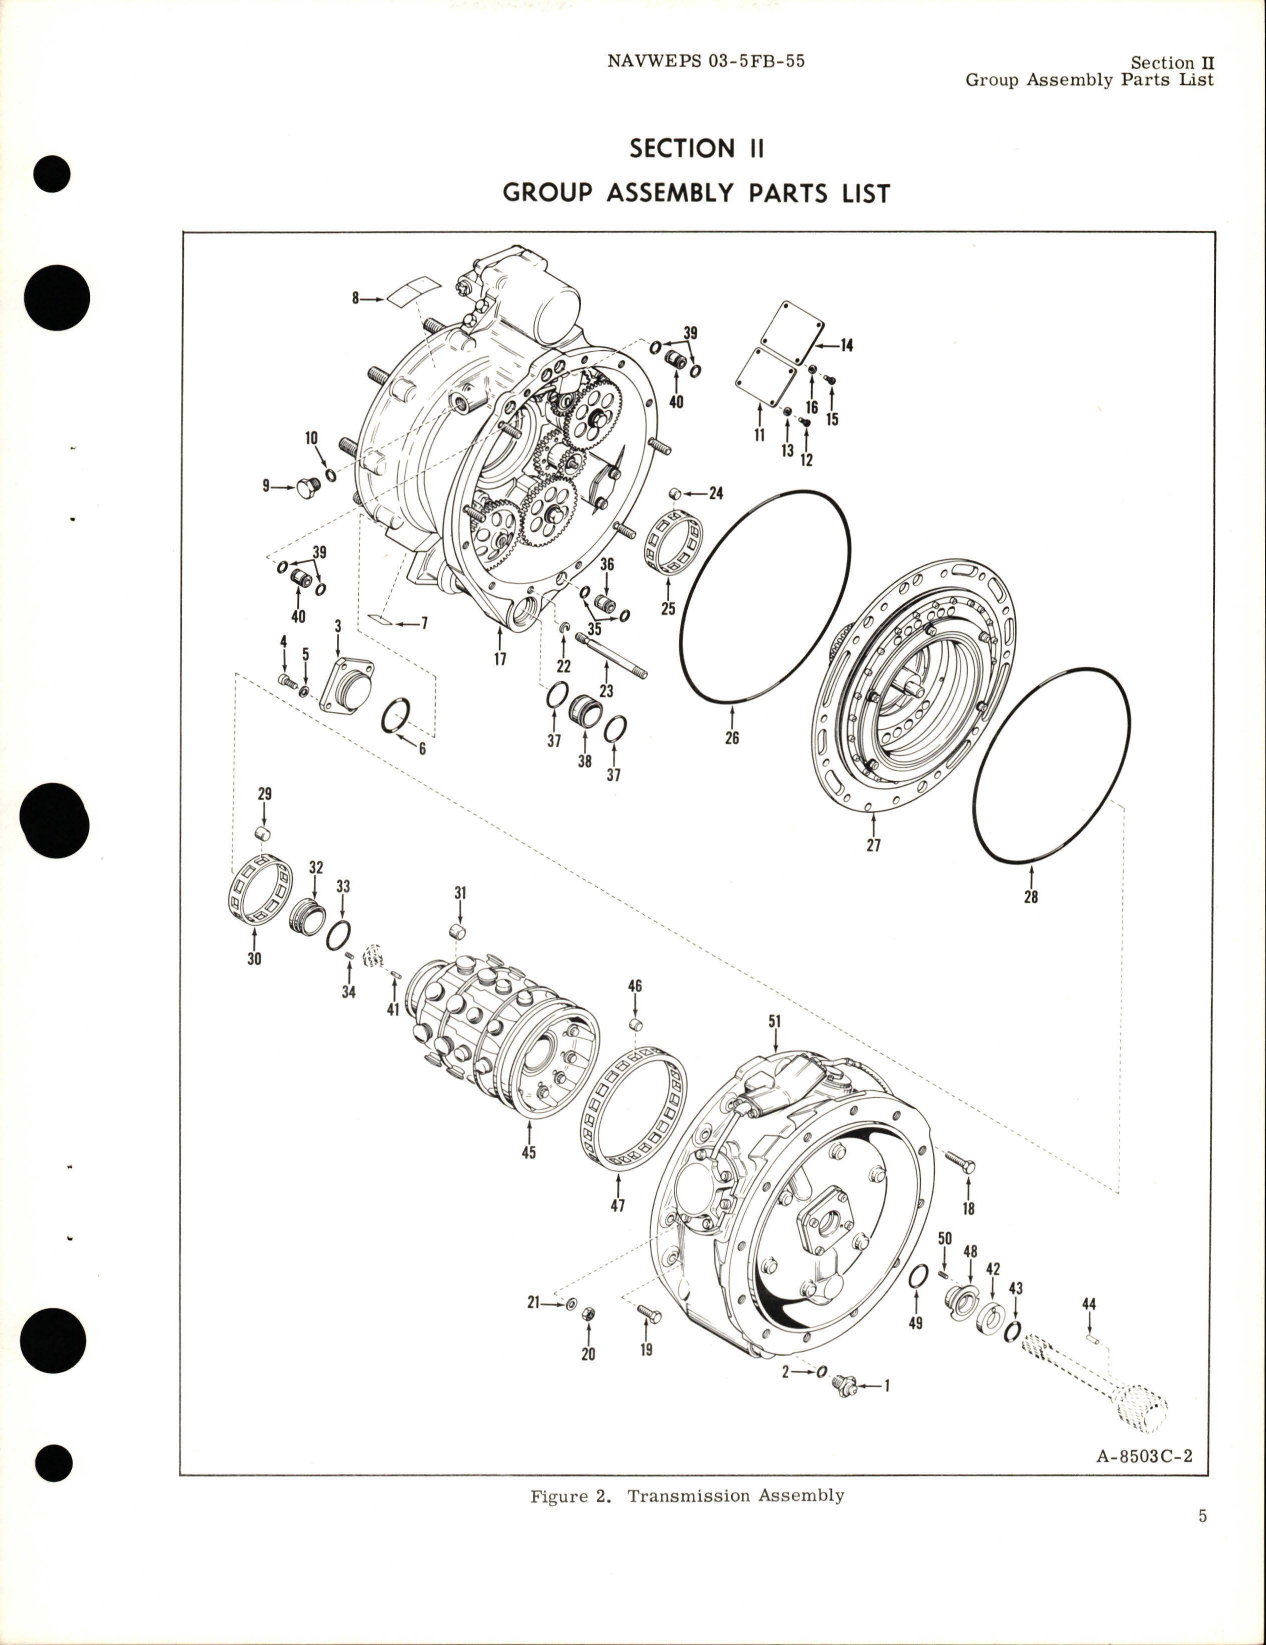 Sample page 9 from AirCorps Library document: Illustrated Parts Breakdown for Constant Speed Transmission - Parts 685661F, 685661E, 685661D